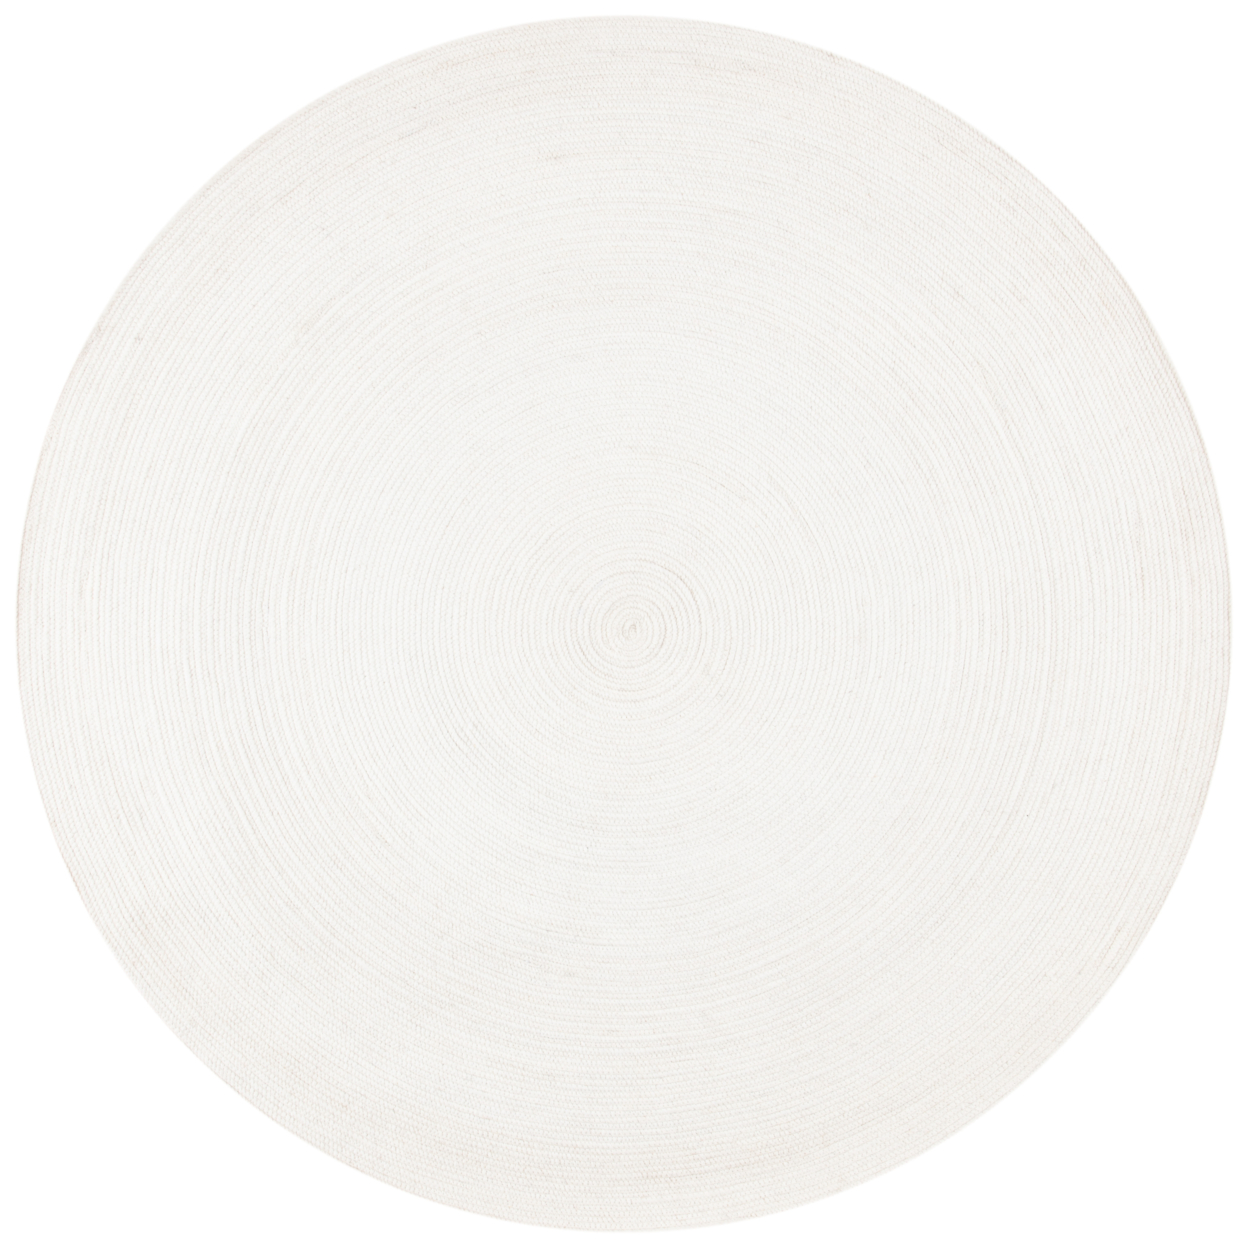 SAFAVIEH Braided Collection BRD901A Handwoven Ivory Rug - 6' Round